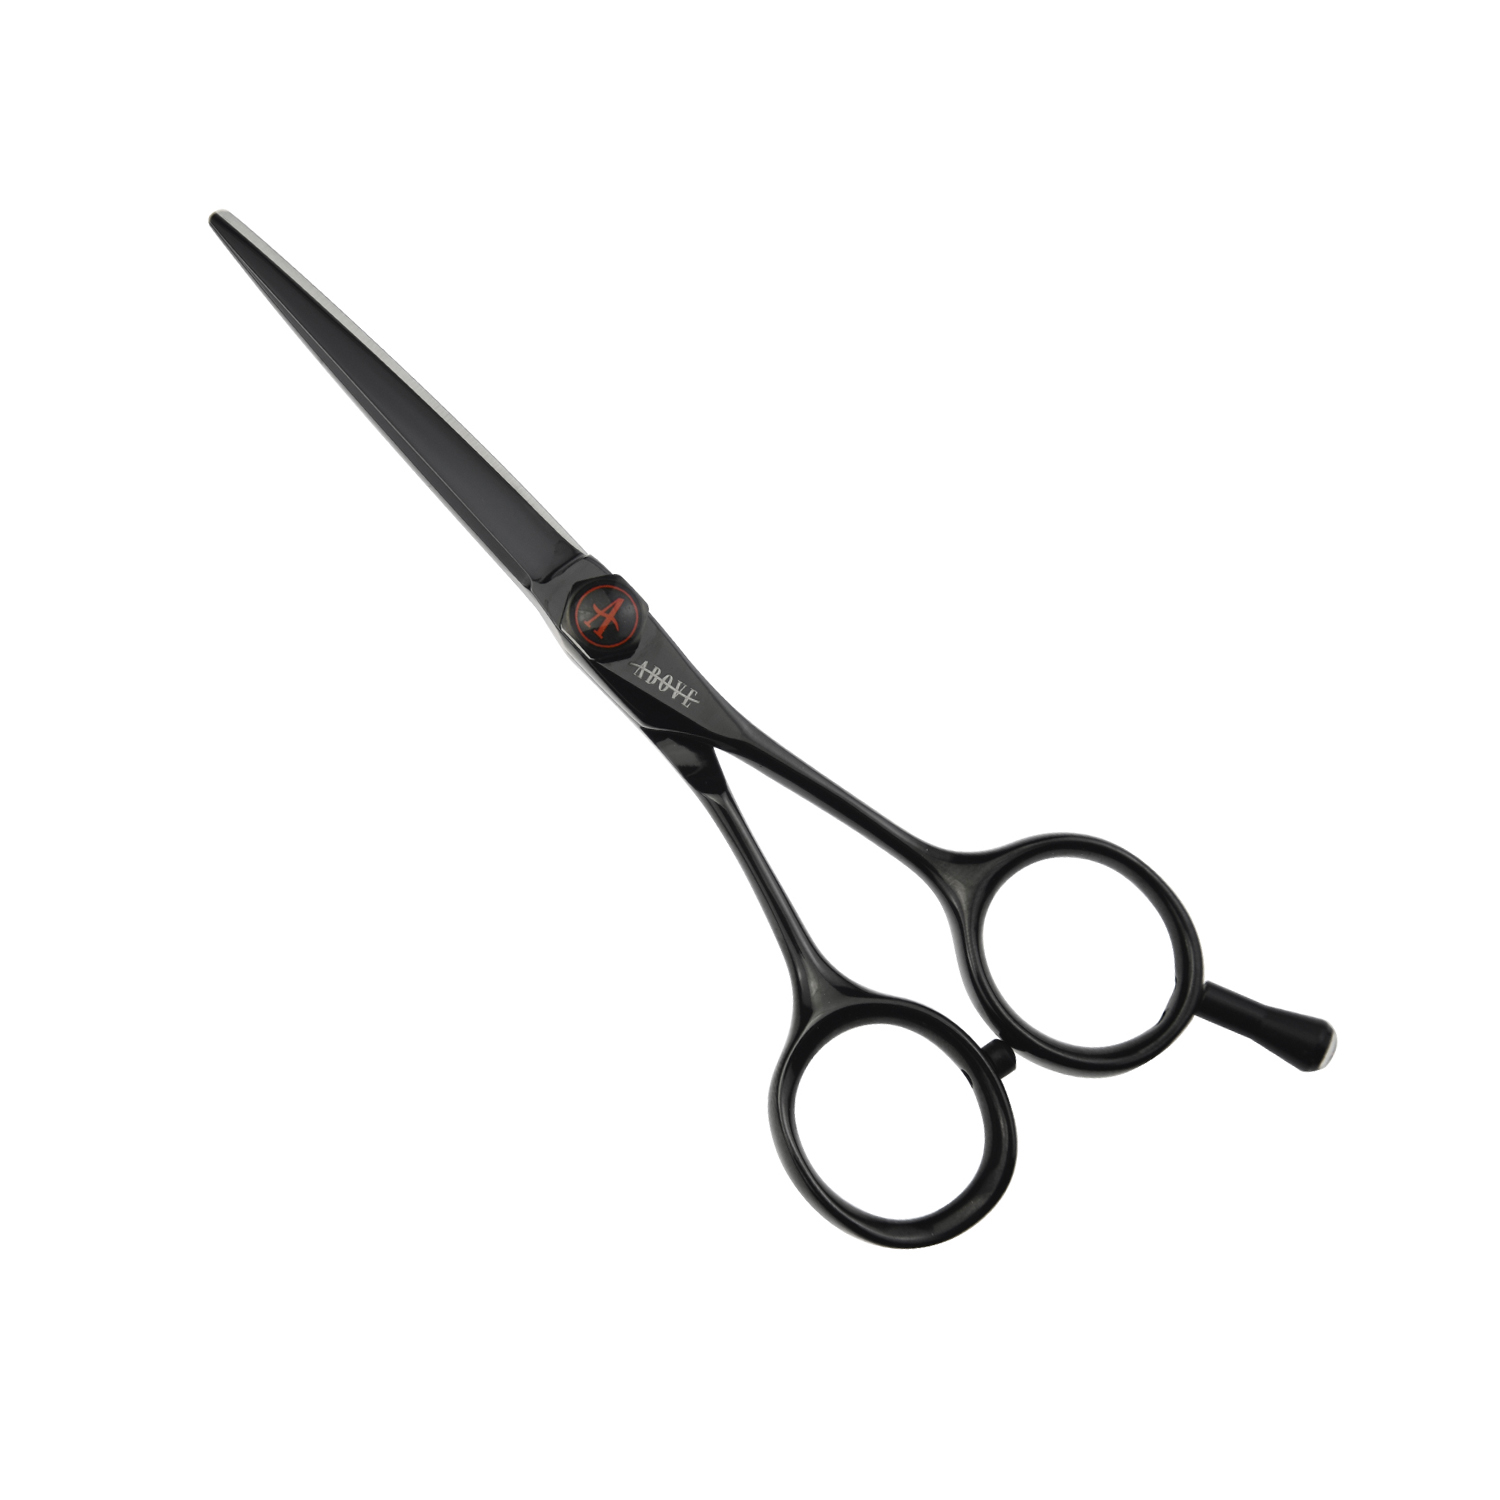 Above Shears Professional Hair Cutting Scissors Classic X Black. Hair Scissors Set, Hair Scissors Kit. 5.25 inch